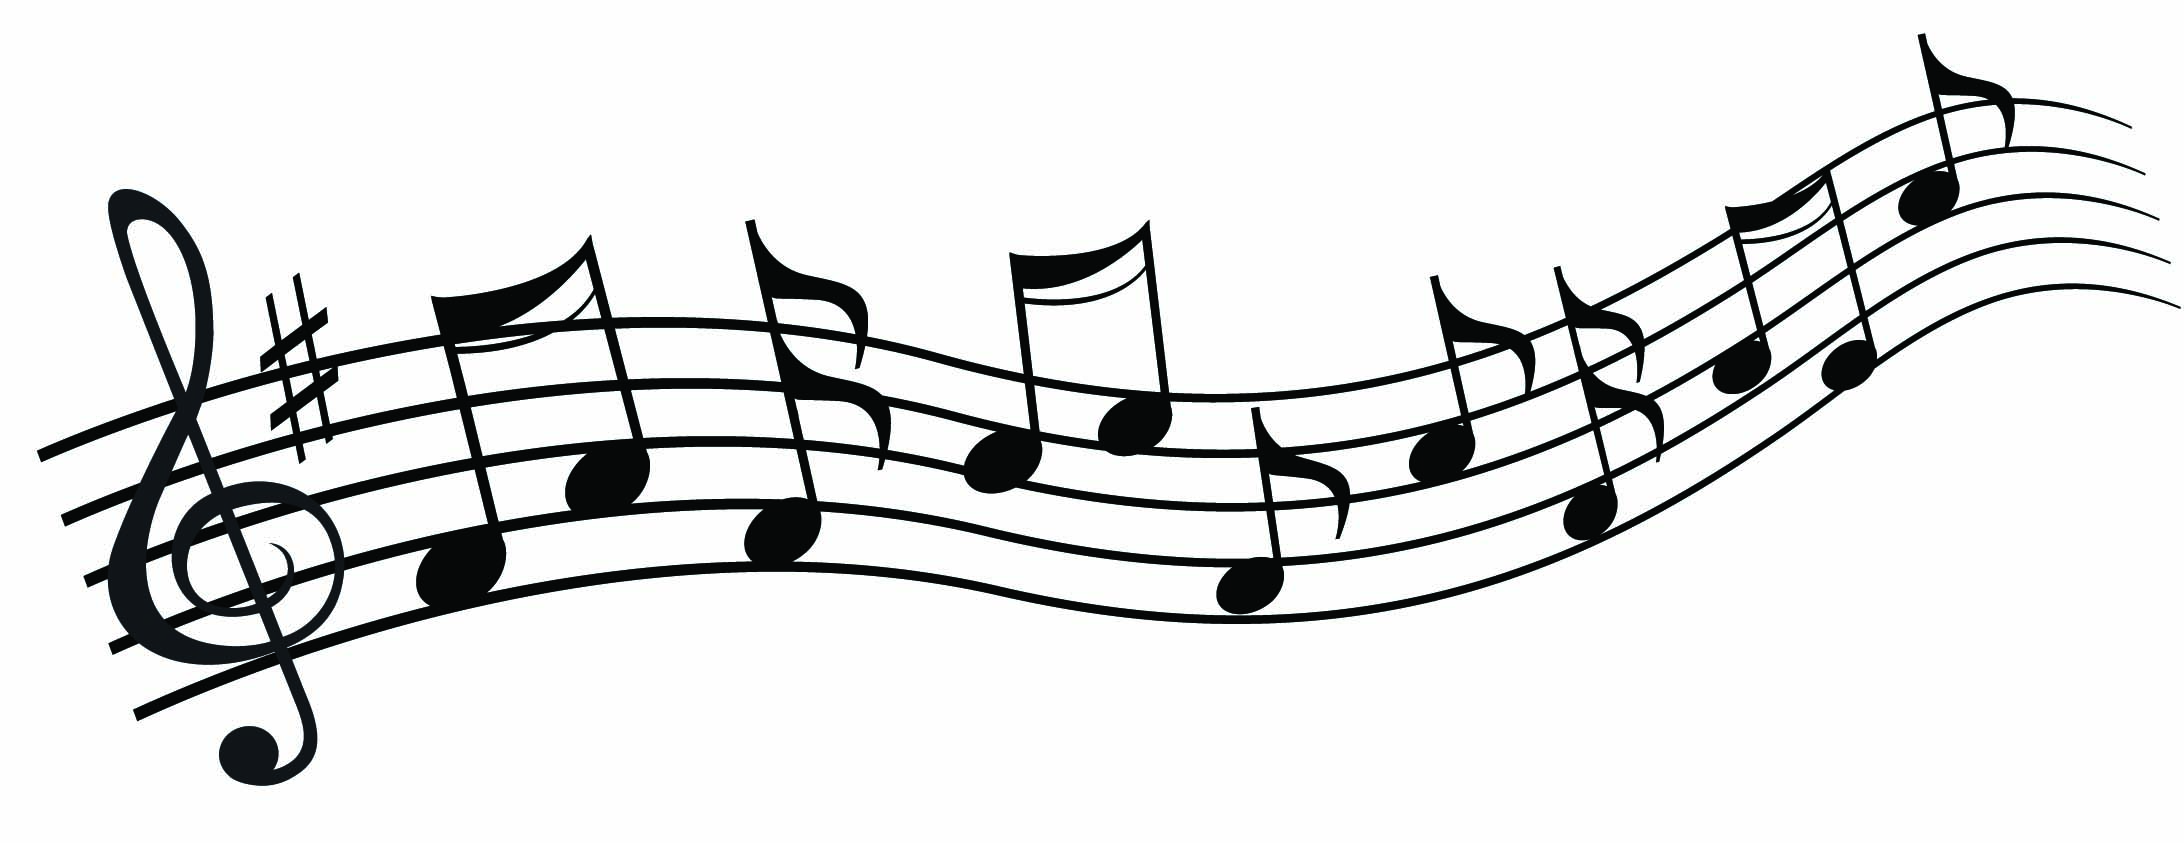 Free music clip art images 2 - Music Staff Clipart